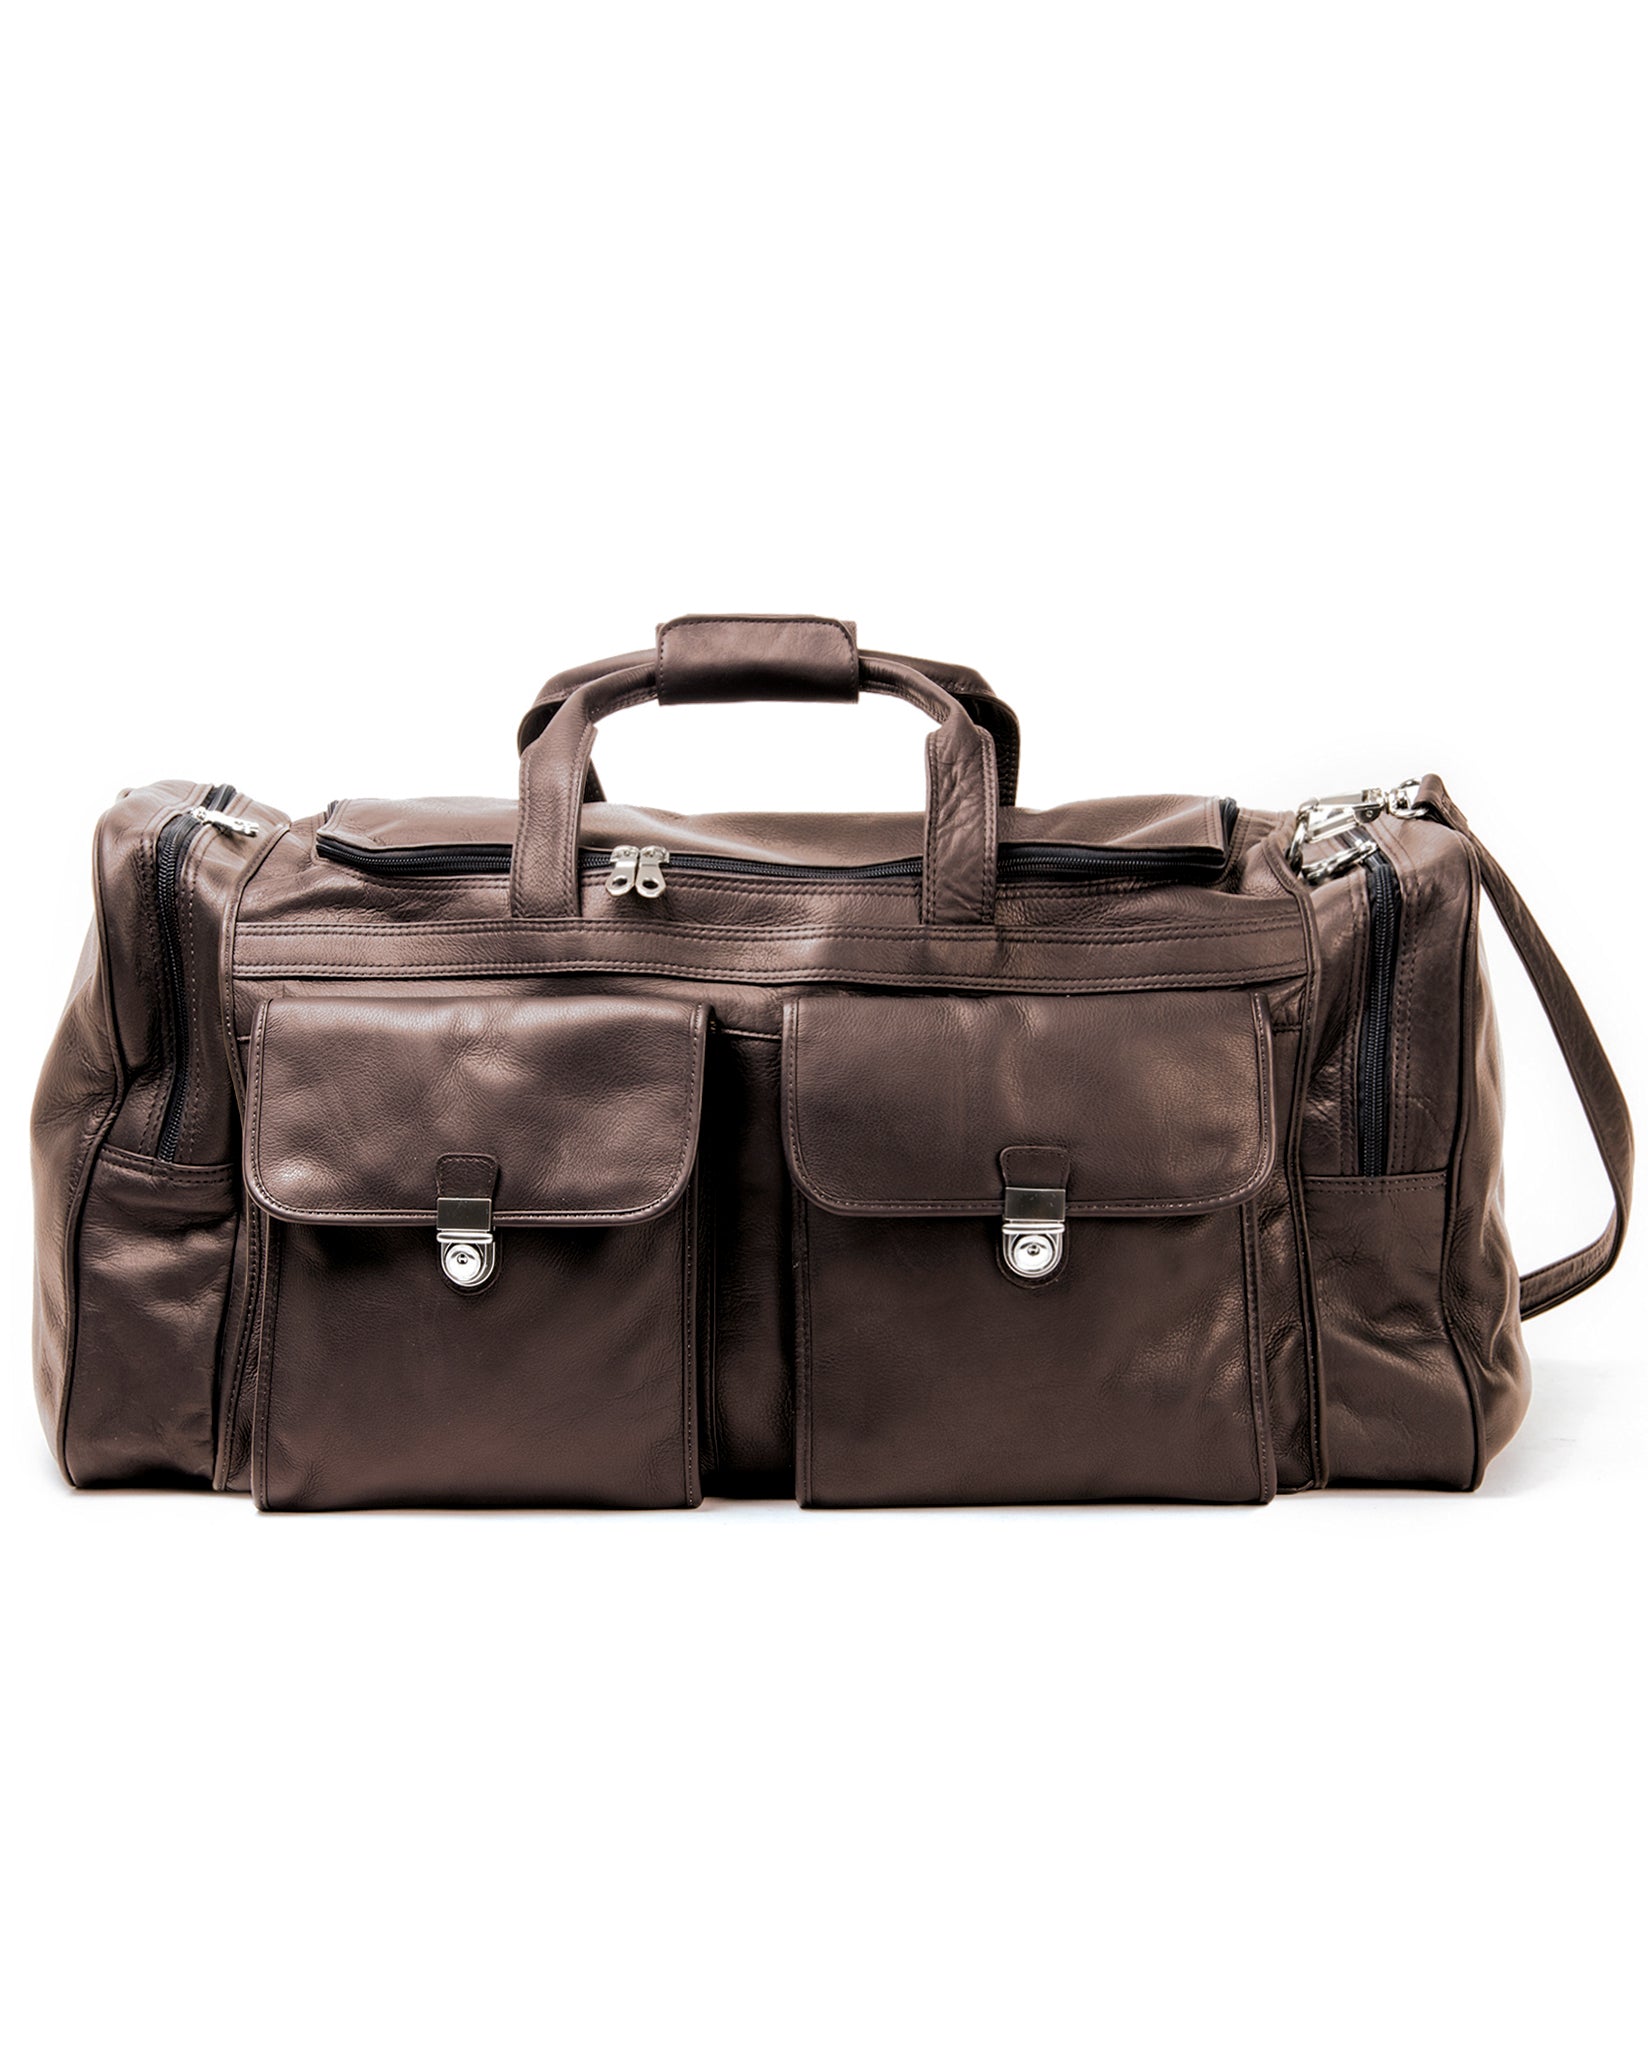 Country Travelbag extra large